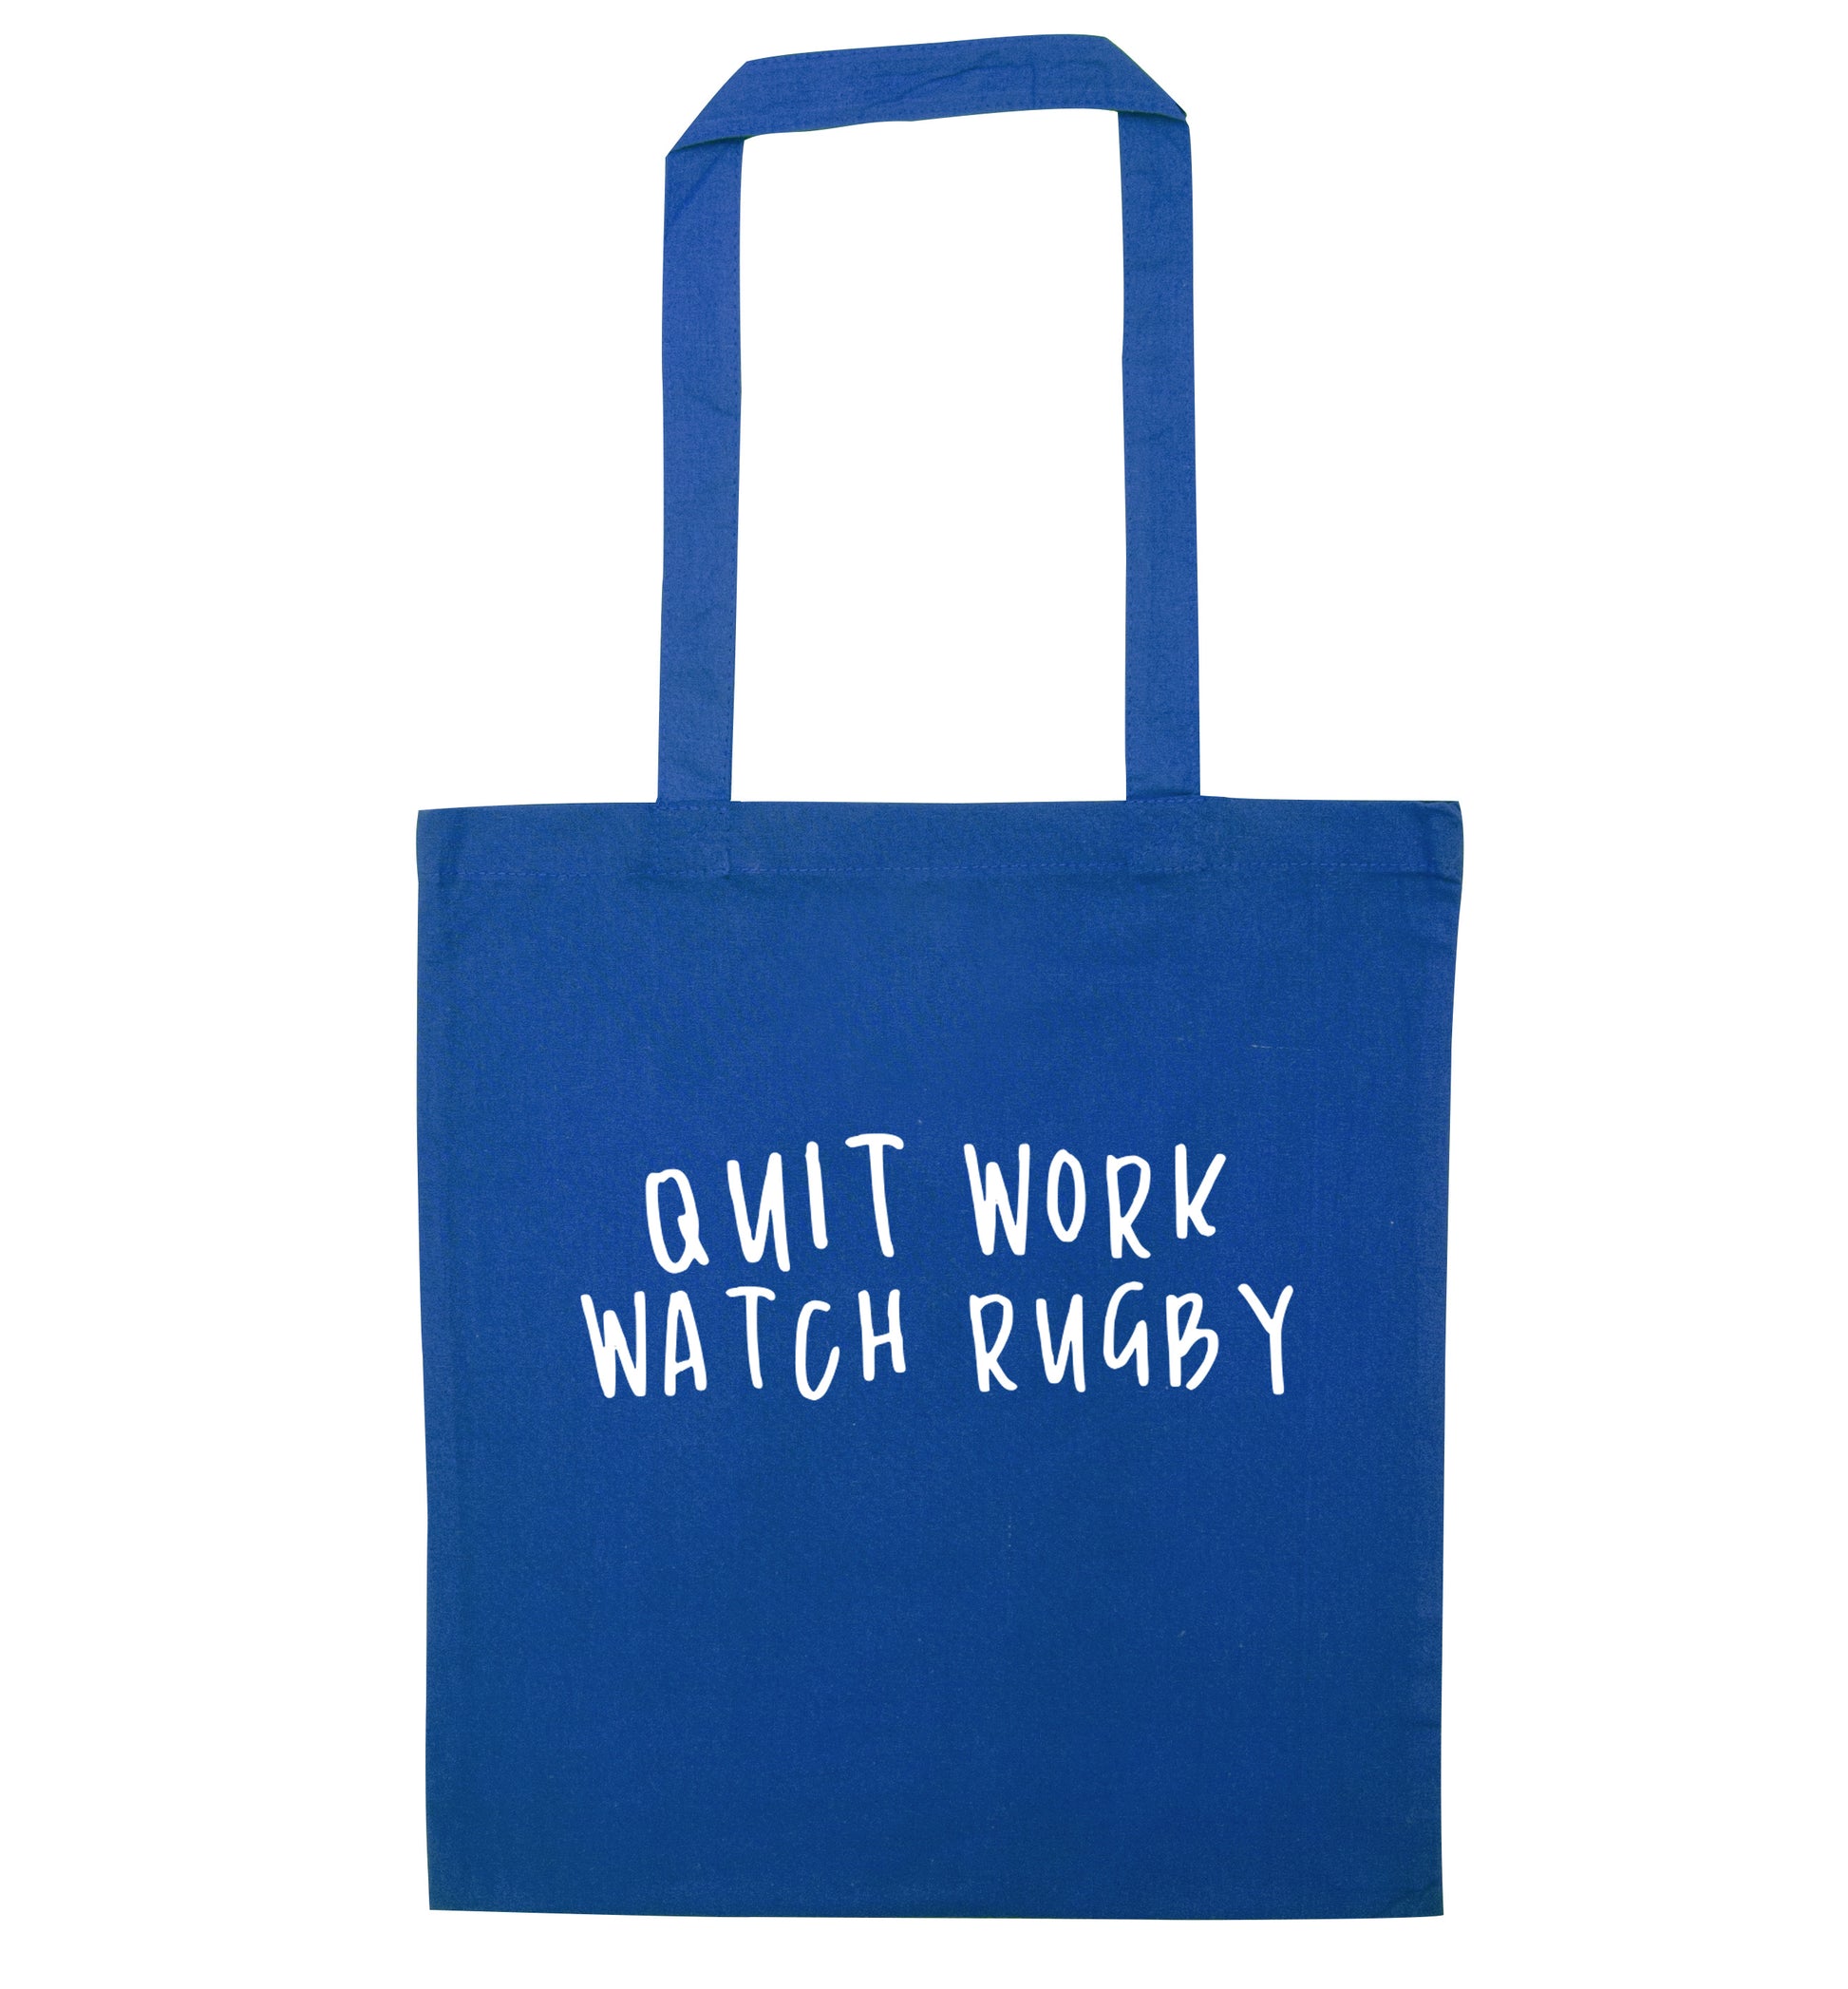 Quit work watch rugby blue tote bag